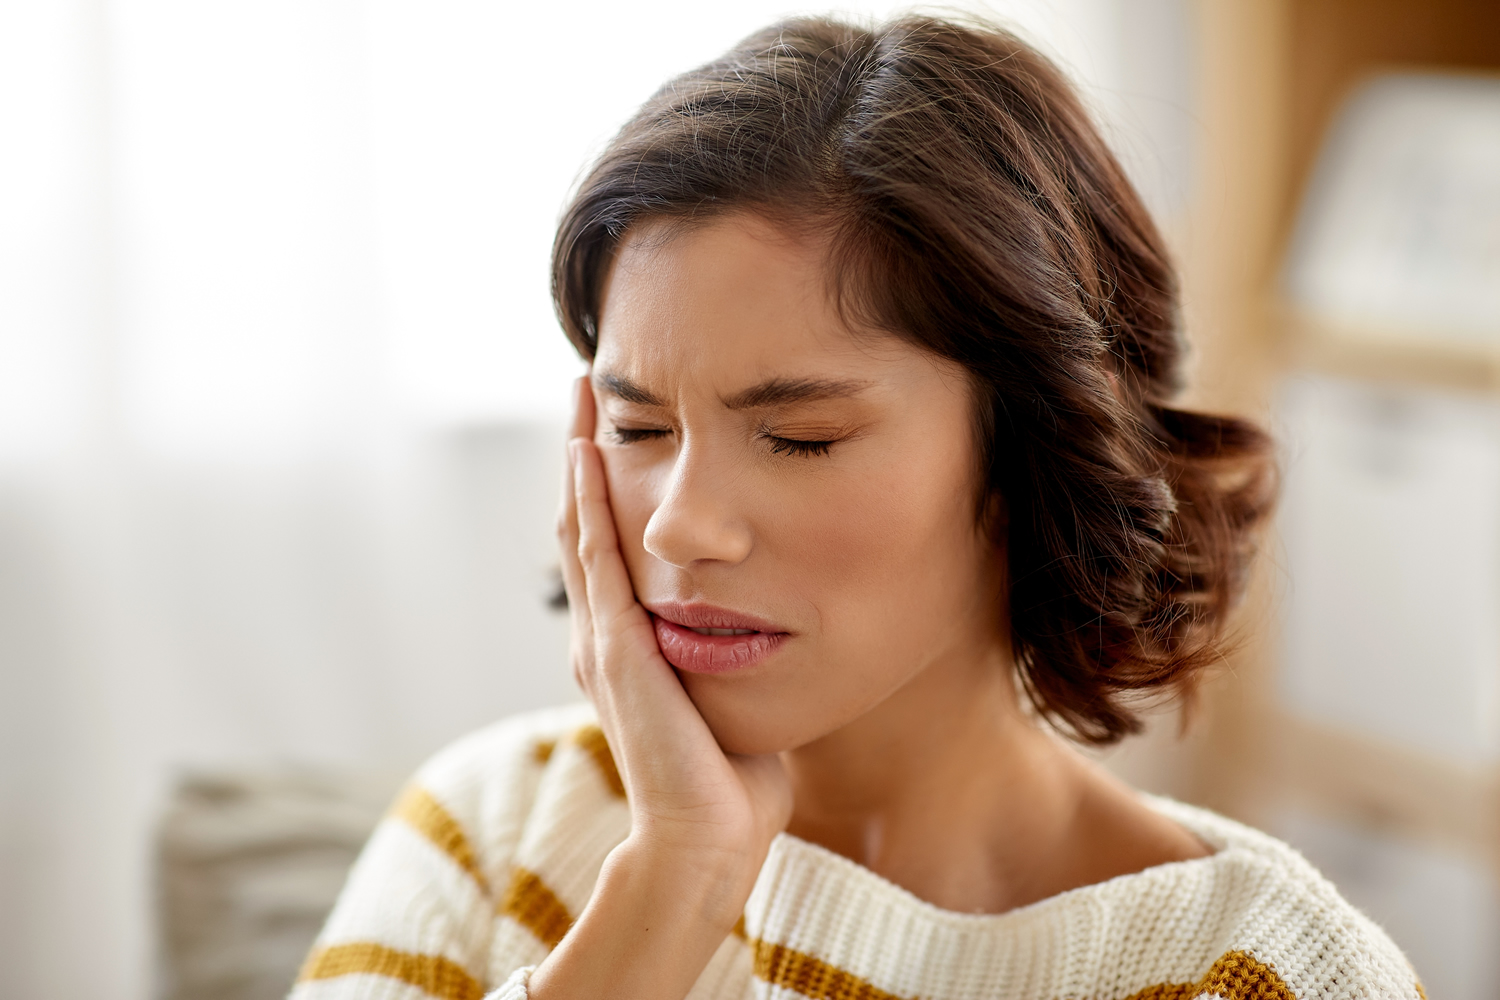 Top 8 Reasons Why You Have a Toothache and How to Treat It